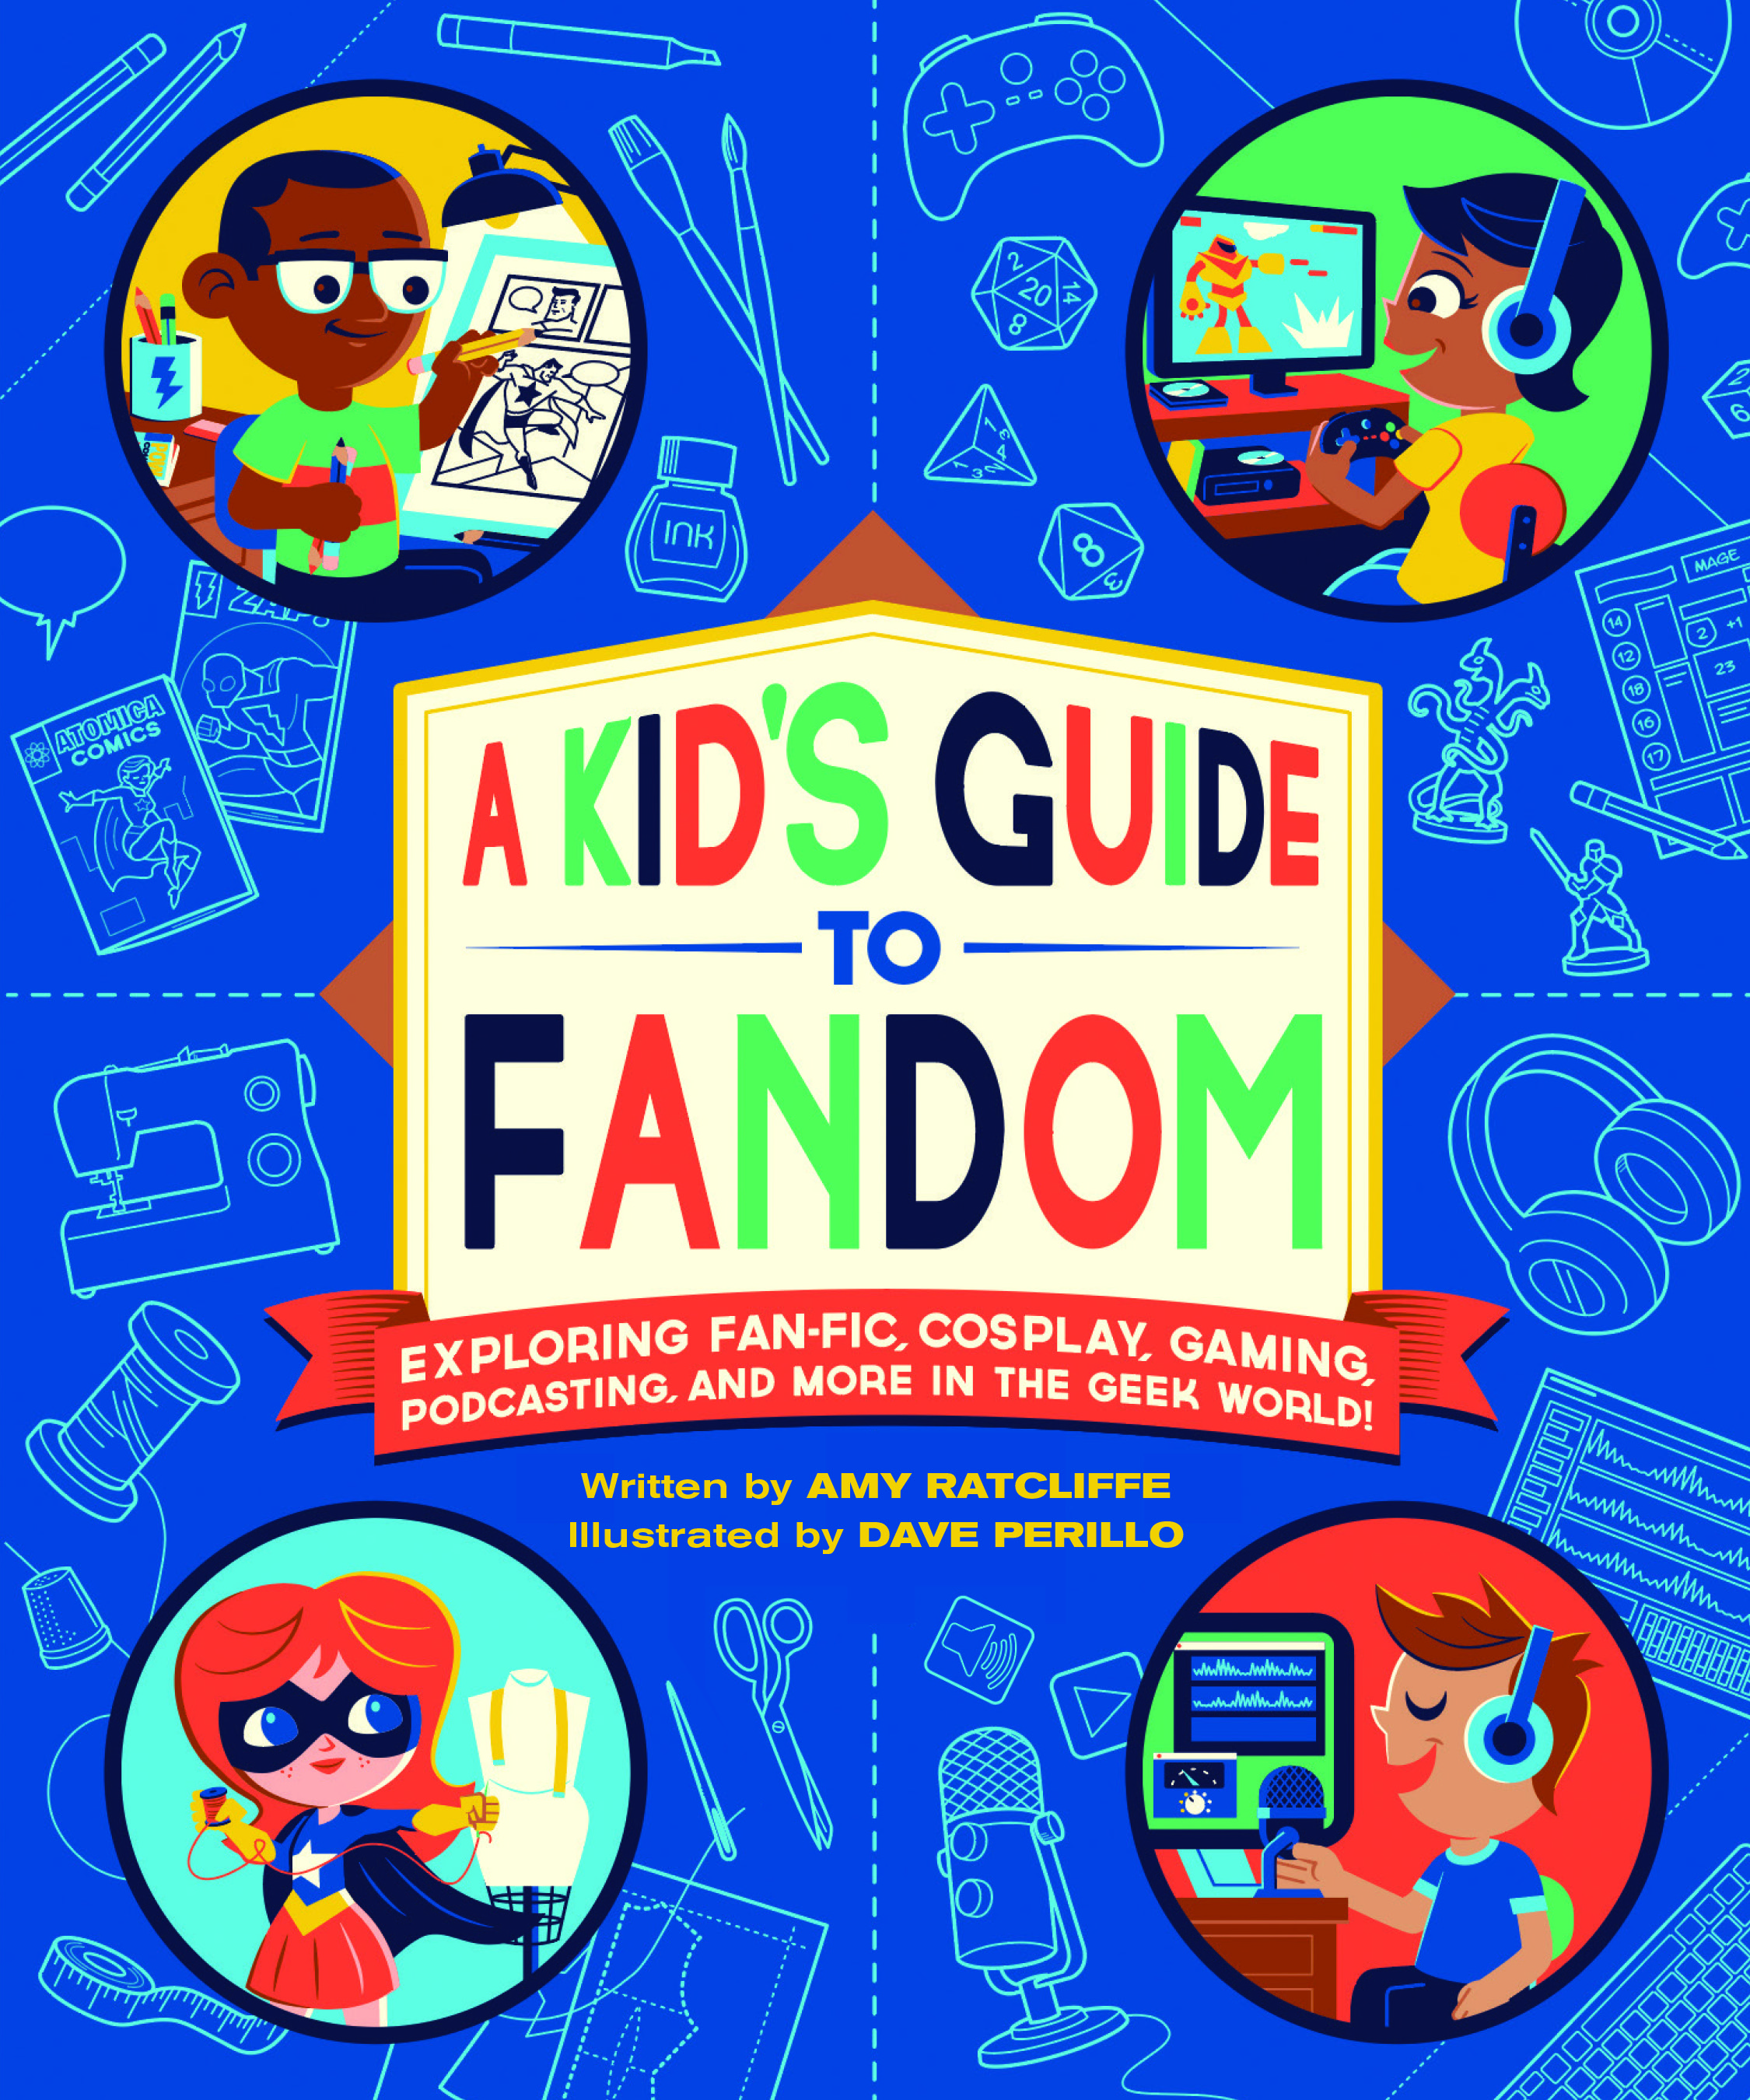 Episode 122: A Kid’s Guide to Fandom with Amy Ratcliffe